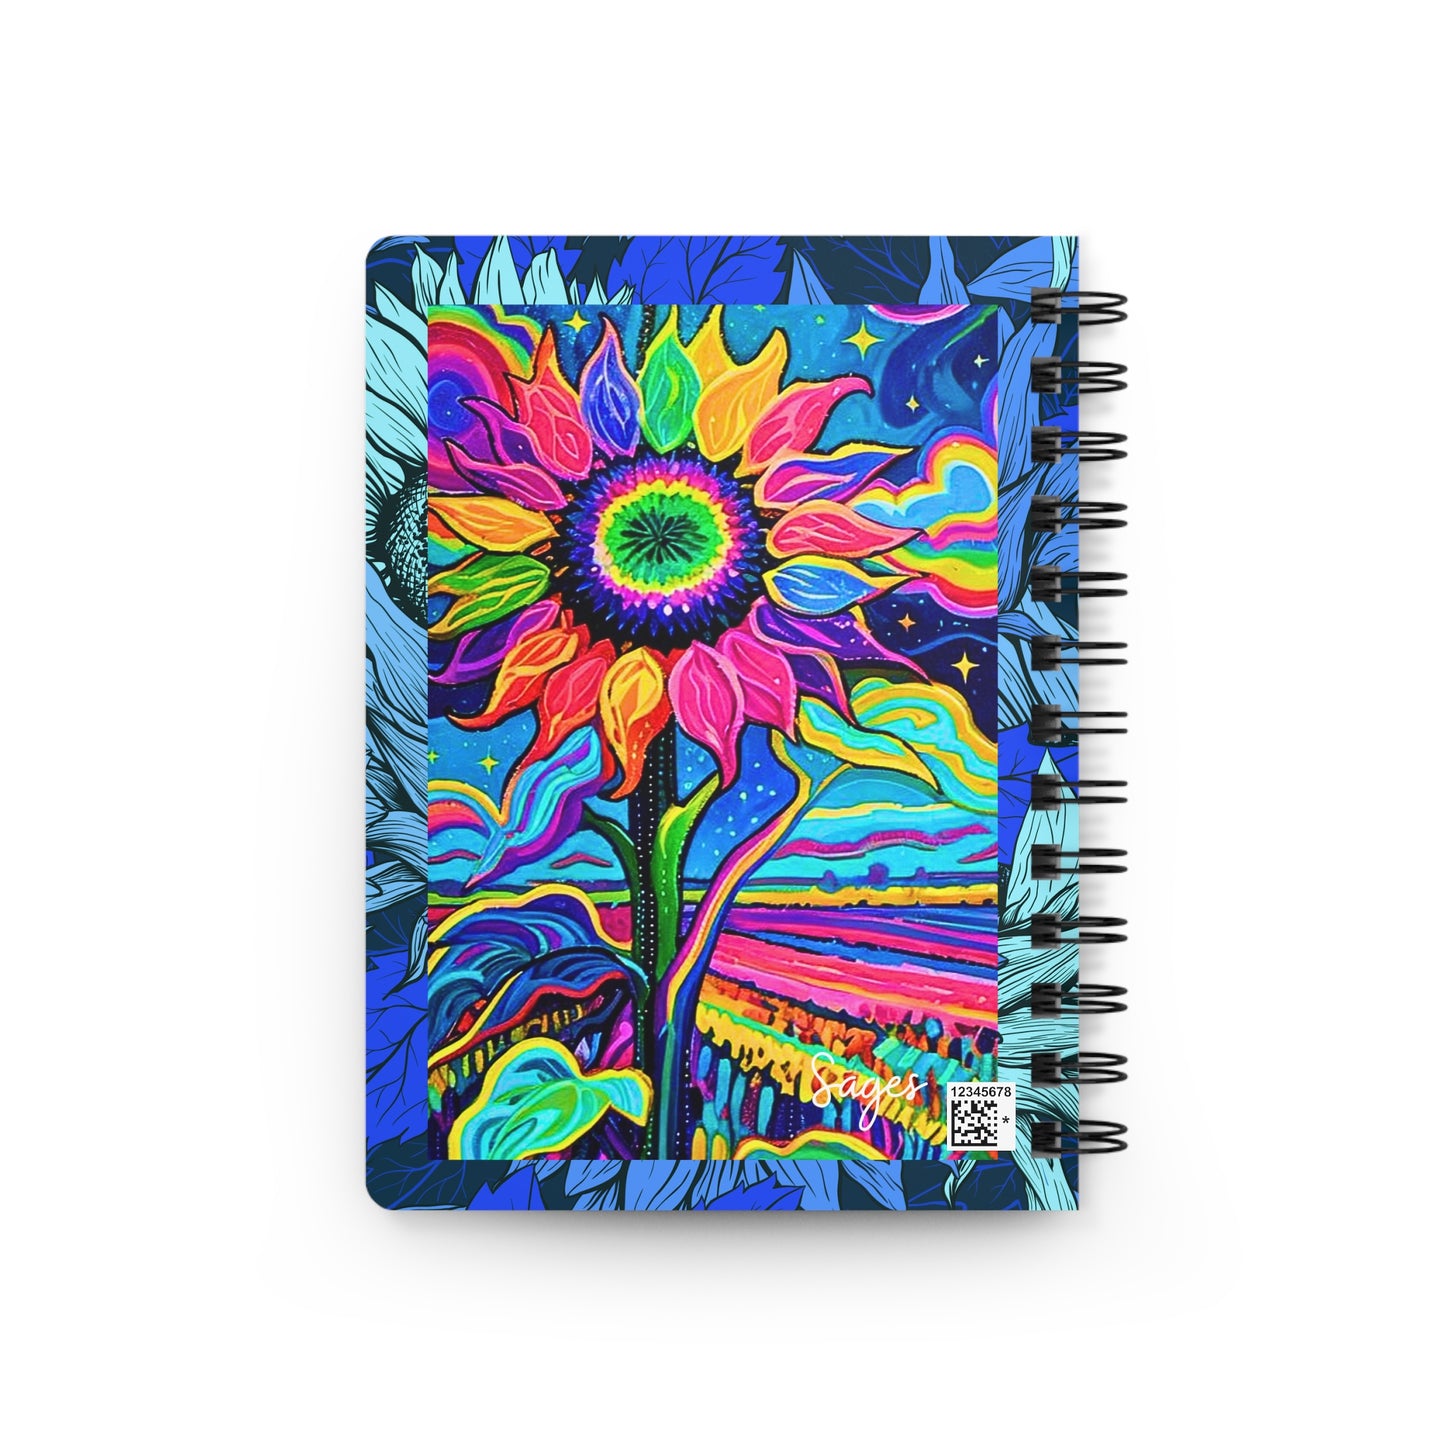 Electric Sunflower Collage Writing Sketch Inspiration Spiral Bound Journal